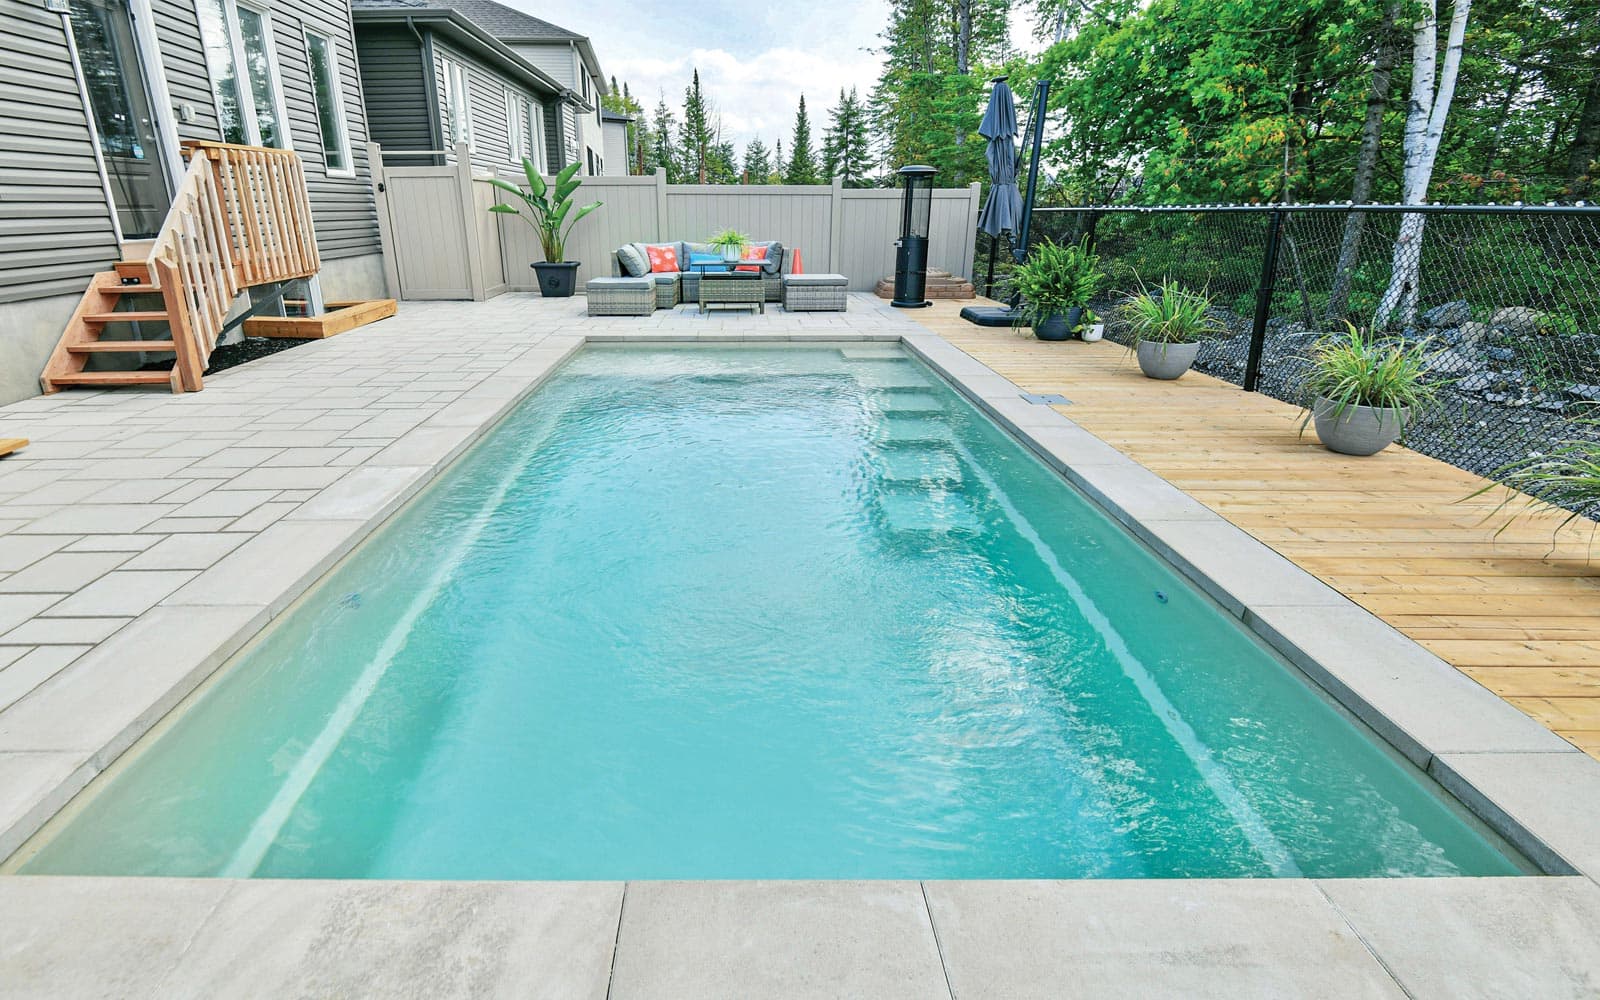 How Much Does Pool Heating Cost? Discover the Affordable Options